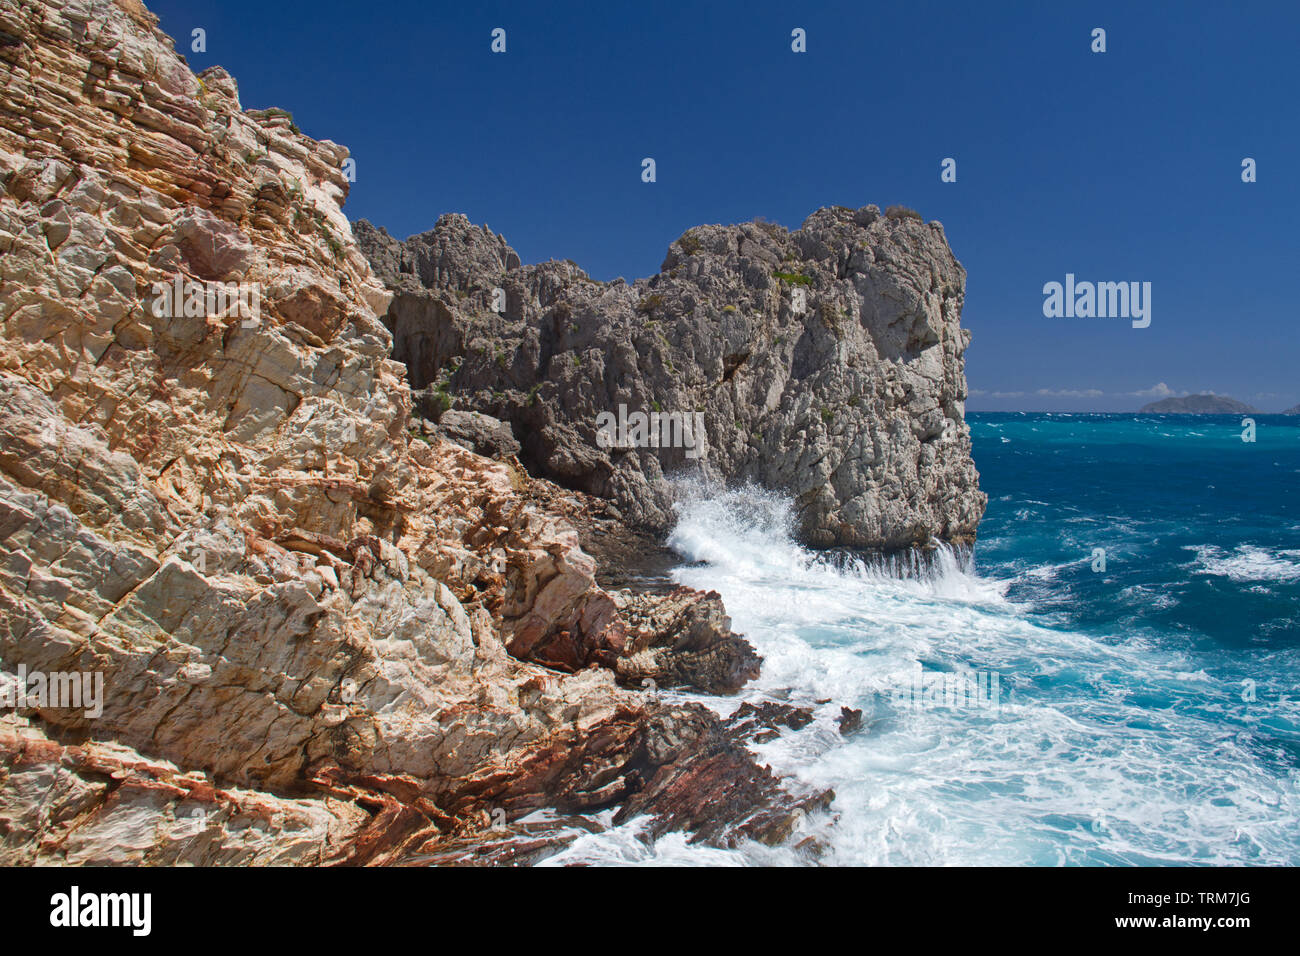 Waves breaking on cliffs on the coast of Crete, Greece Stock Photo